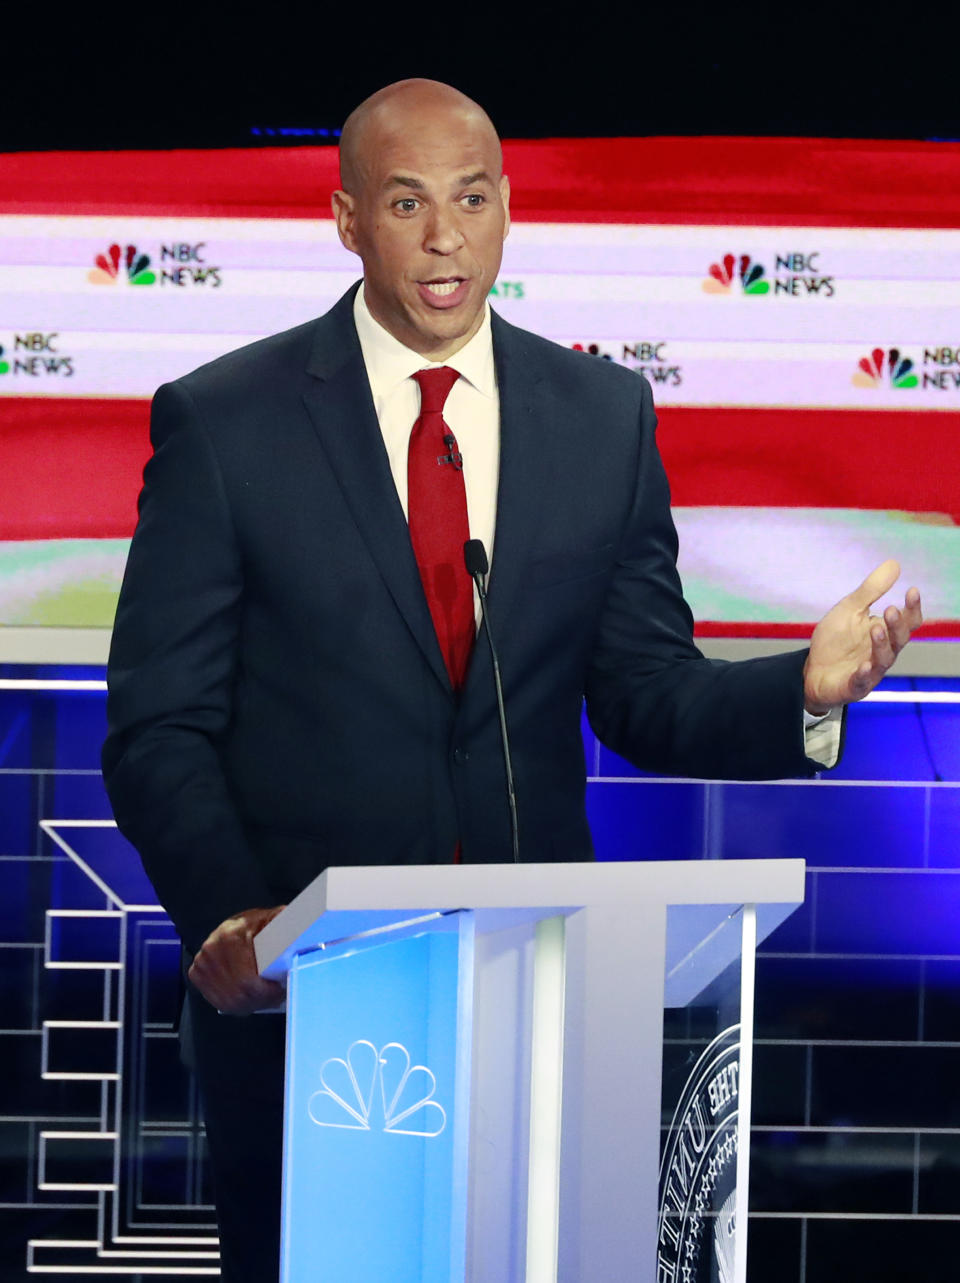 Democratic presidential candidate Sen. Cory Booker, D-N.J., speaks during the Democratic primary debate hosted by NBC News at the Adrienne Arsht Center for the Performing Art, Wednesday, June 26, 2019, in Miami. (AP Photo/Wilfredo Lee)